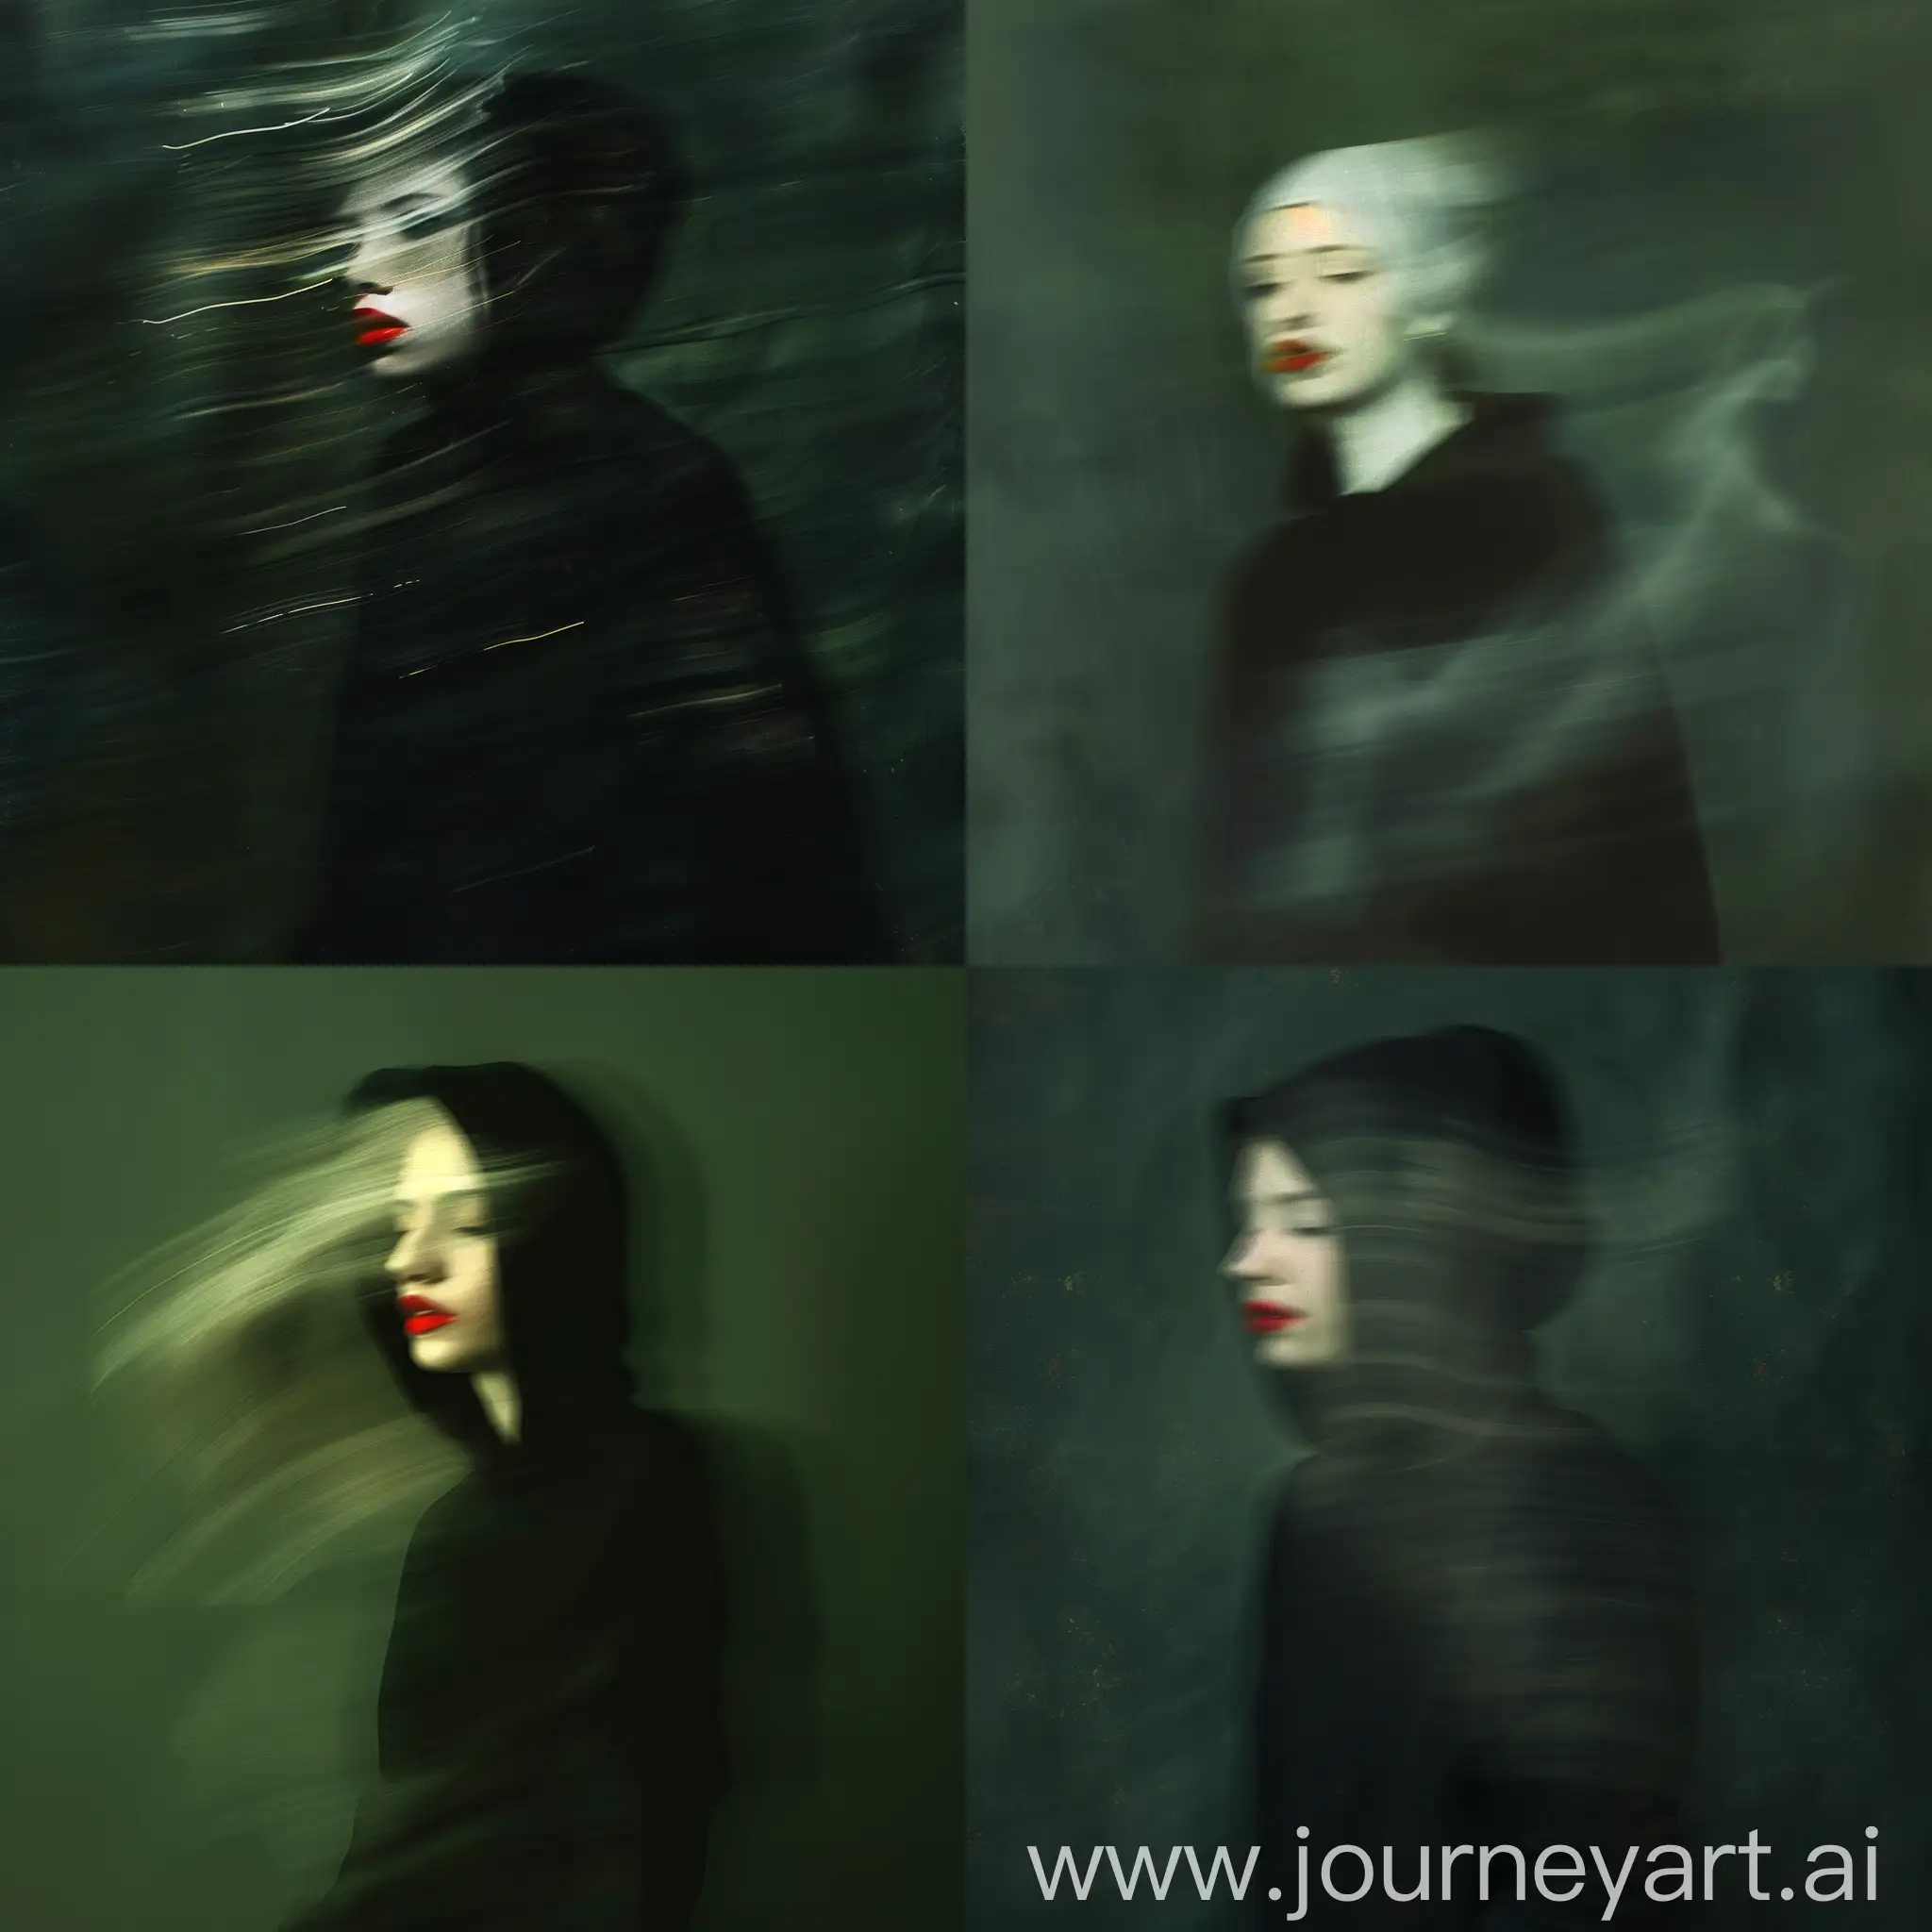 Mysterious-Ghostly-Lady-in-Black-Urban-Nike-Style-Portrait-with-Acidic-Colors